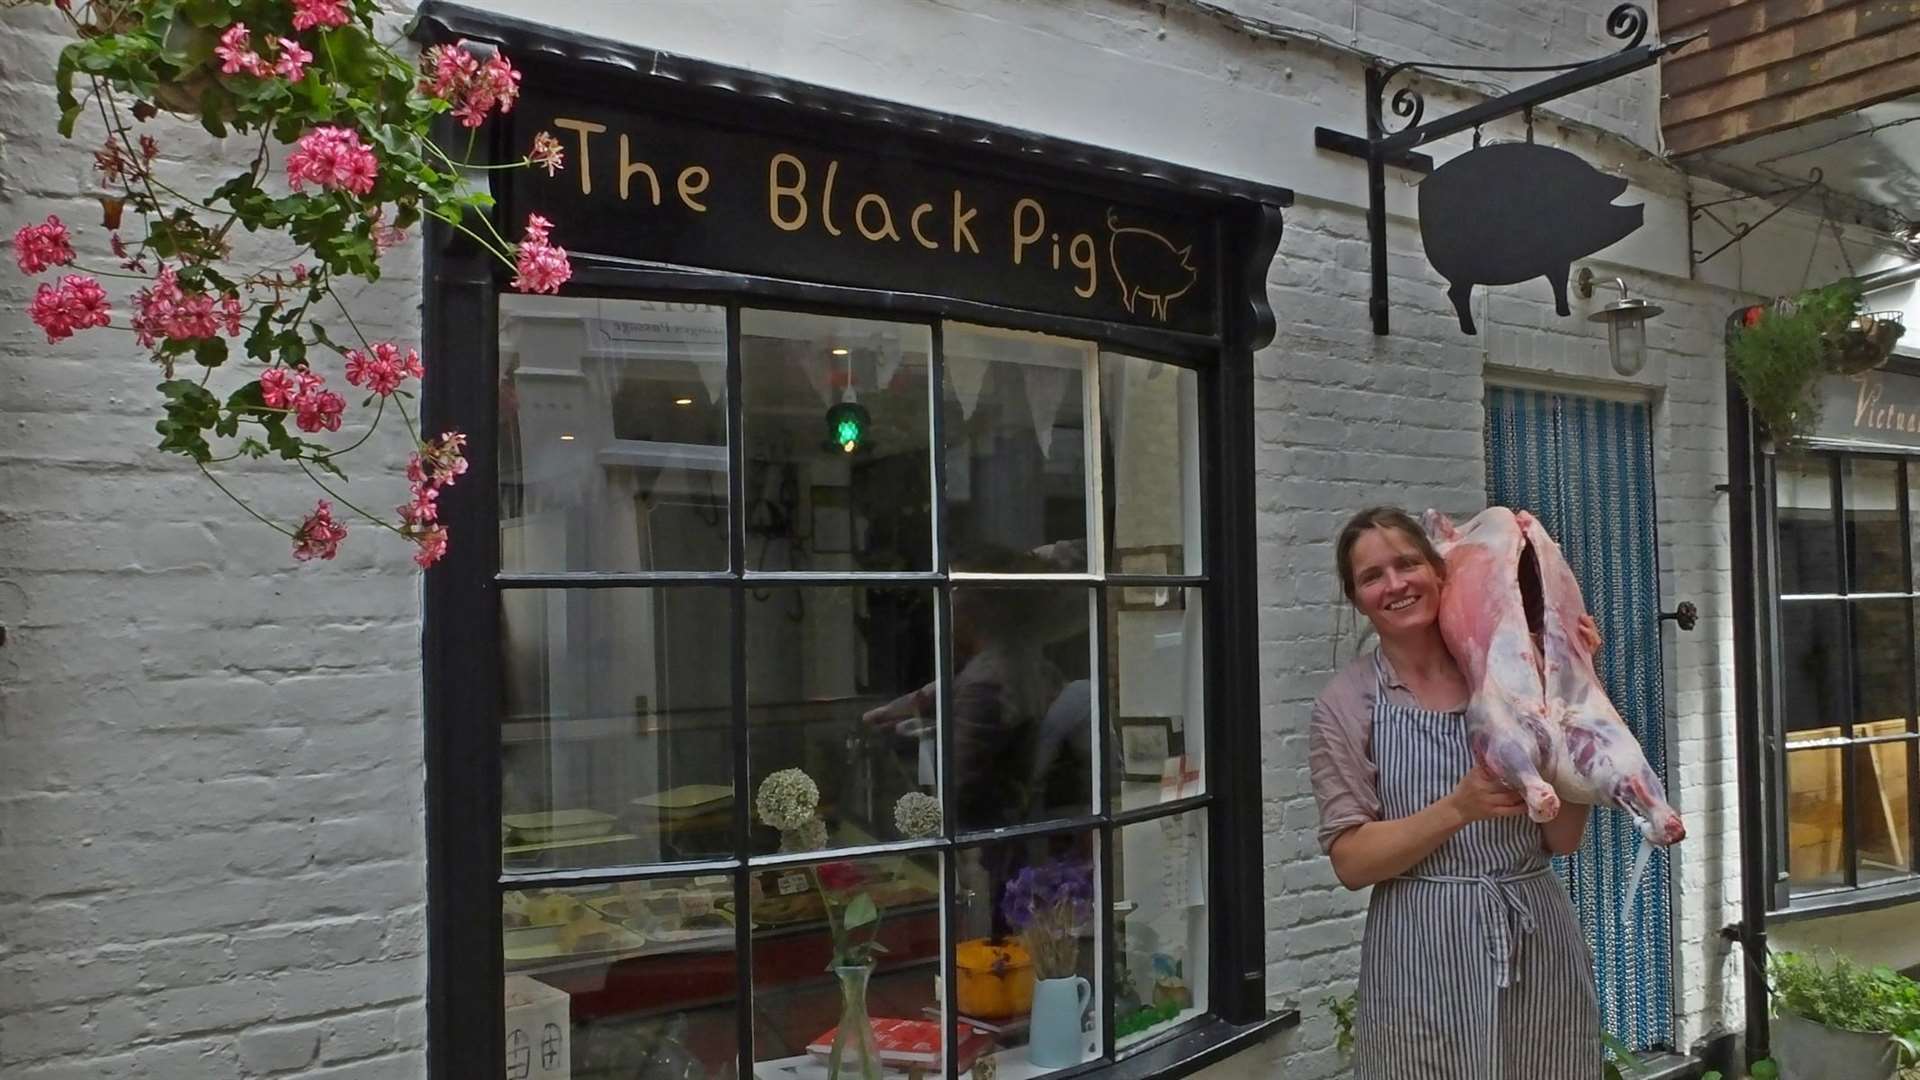 Lizzy Douglas opened The Black Pig in Deal in 2014 and has now won a Young British Foodie award